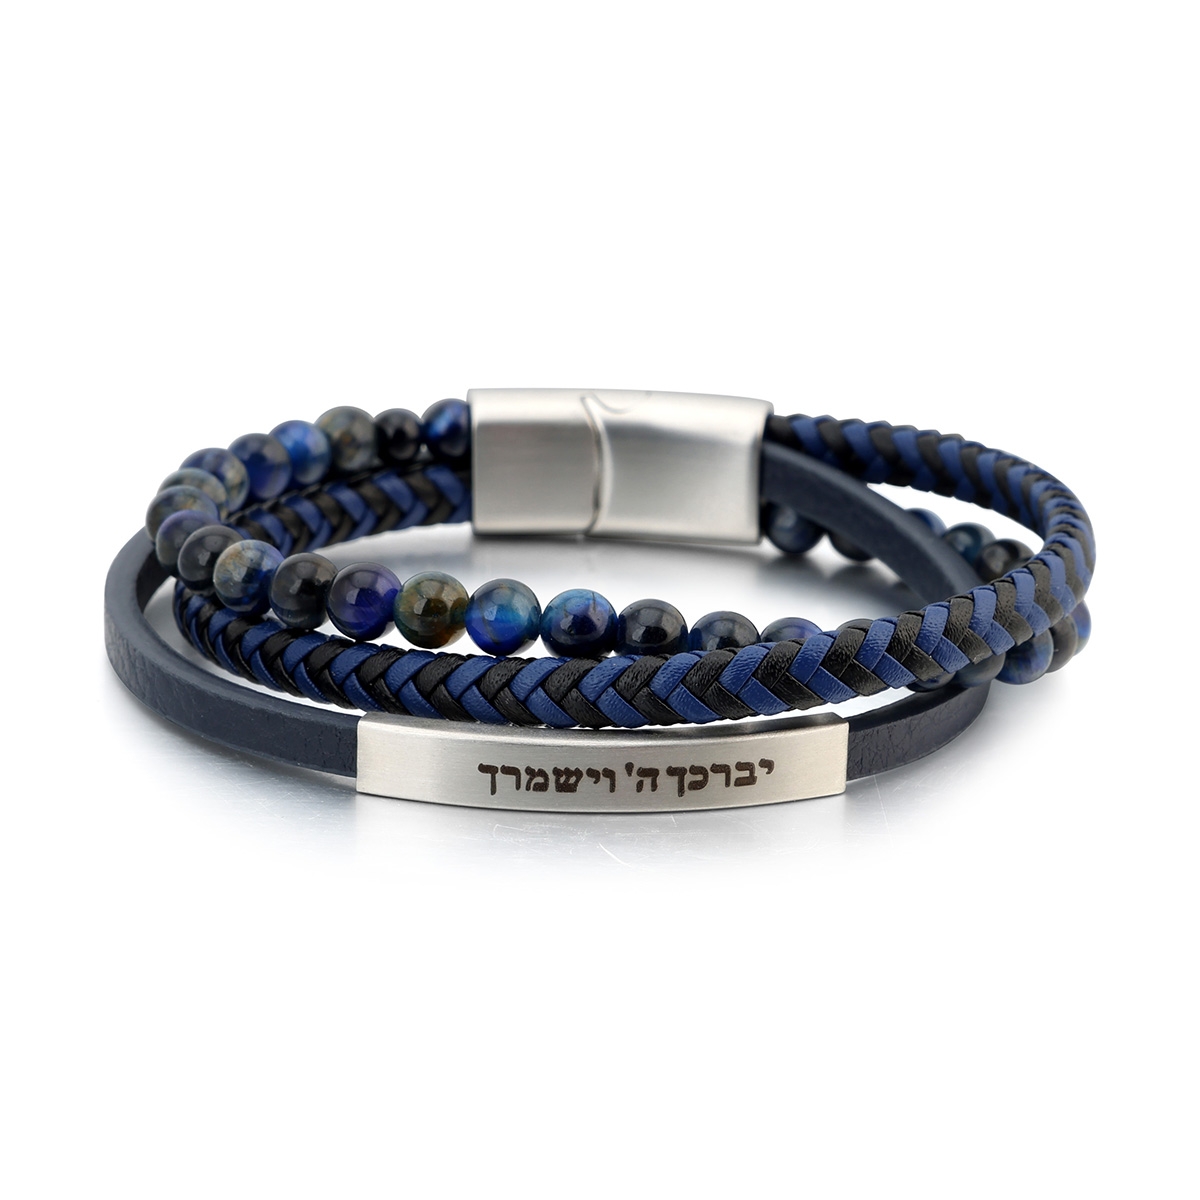 Men's Priestly Blessing 3-Band Beaded Leather Bracelet with Magnetic Clasp - Black and Blue  - 1